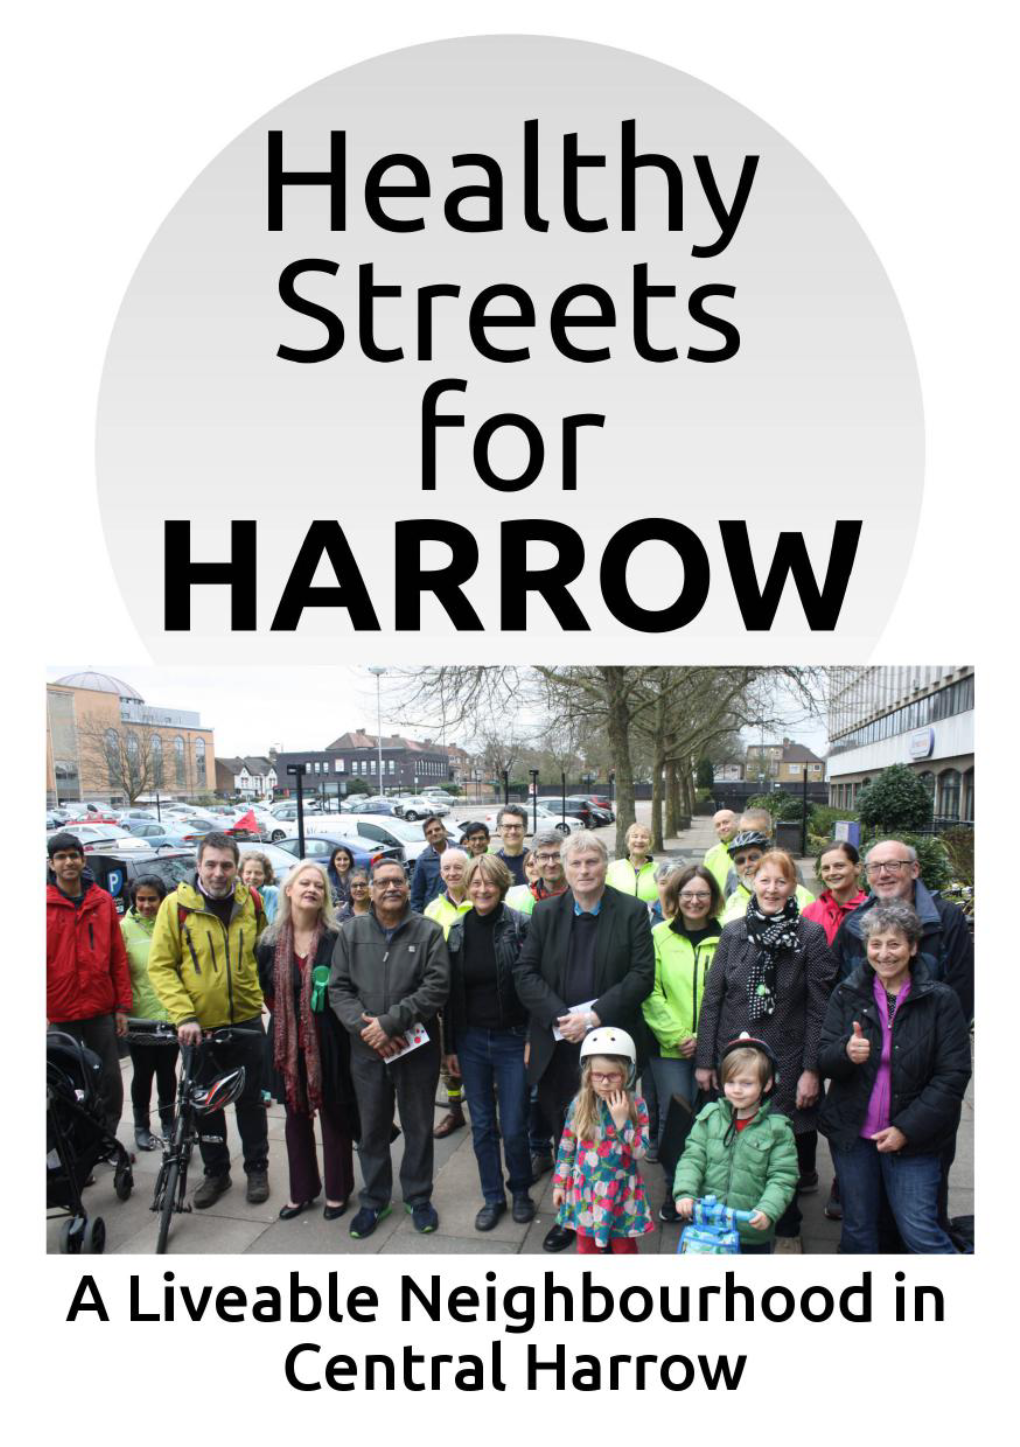 Healthy Streets for Harrow Campaign, Led by Harrow Cyclists, a Branch of the London Cycling Campaign (